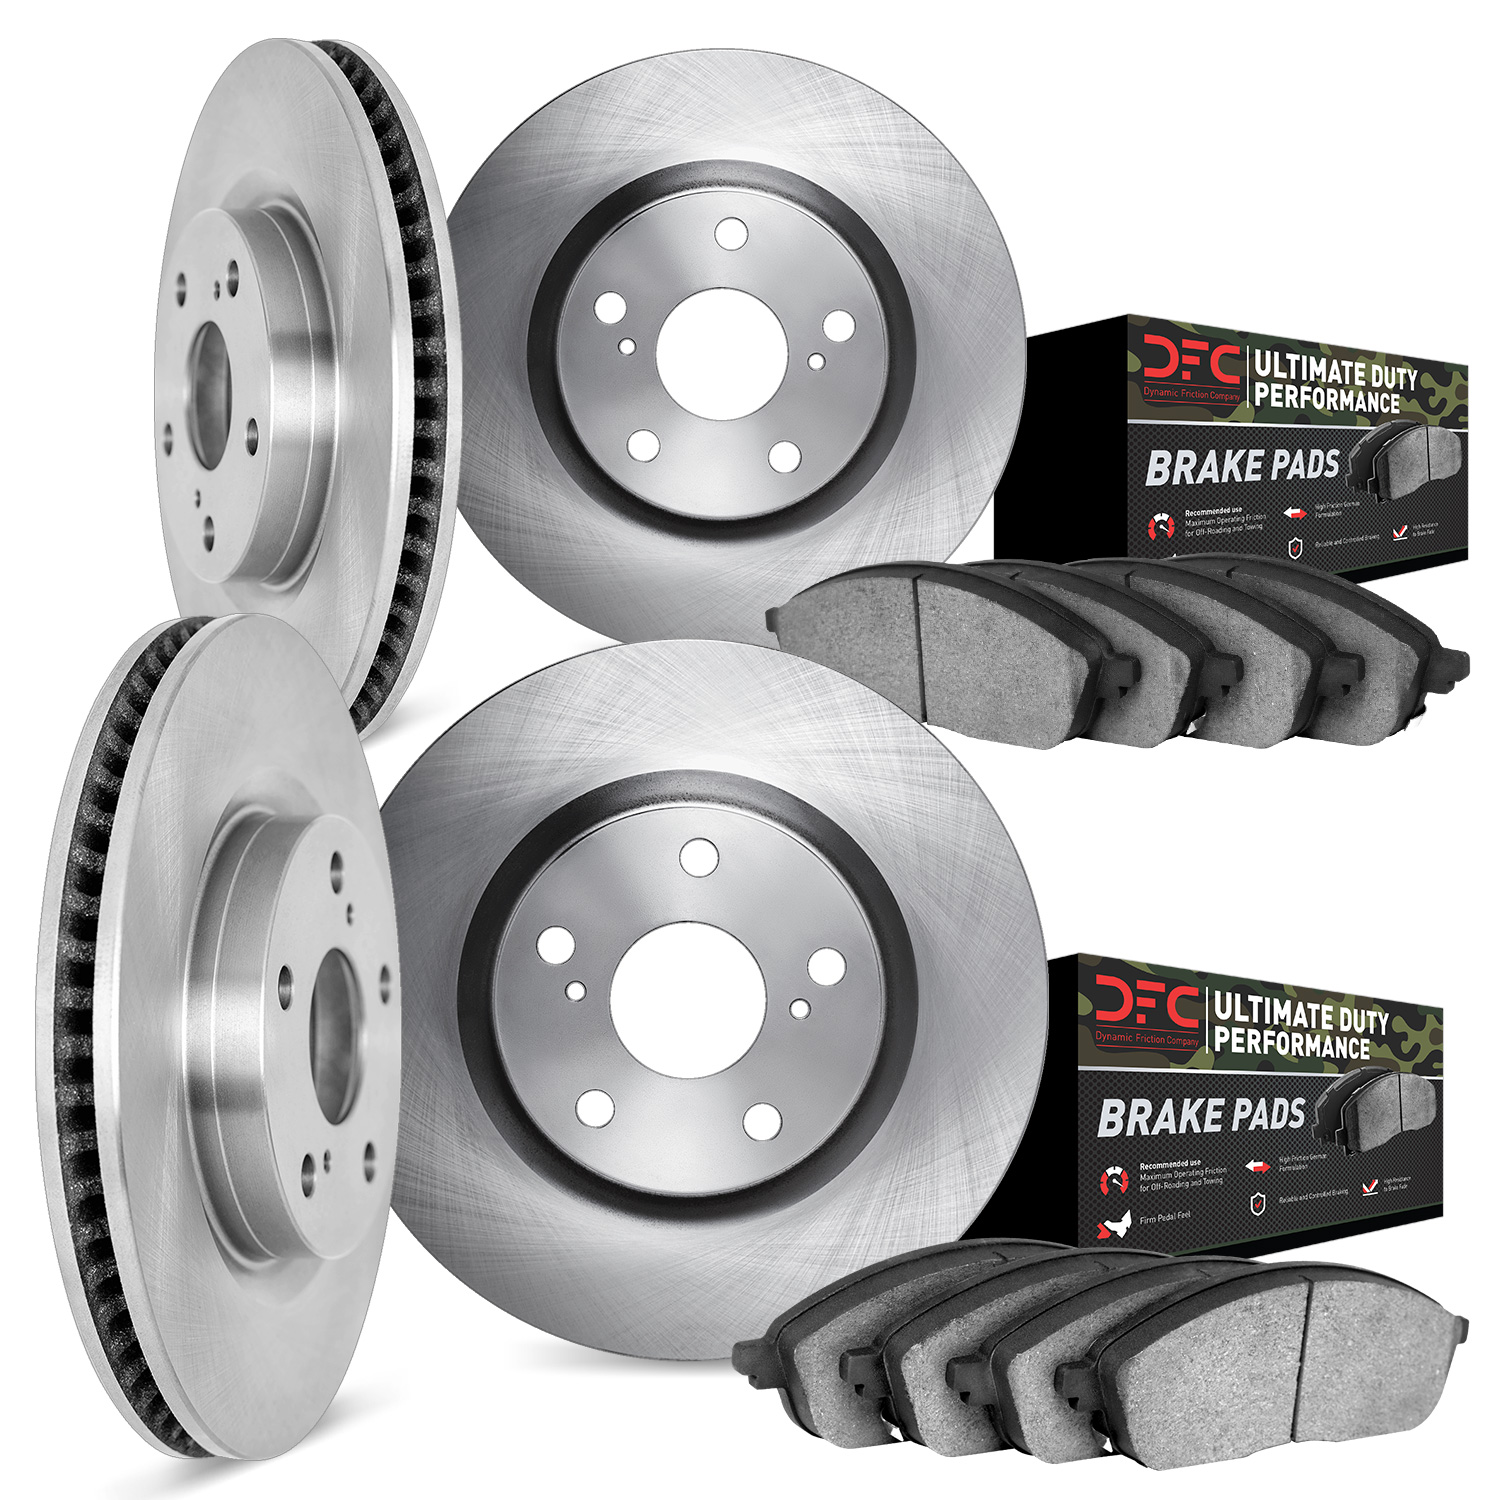 6404-46009 Brake Rotors with Ultimate-Duty Brake Pads, 2009-2015 GM, Position: Front and Rear